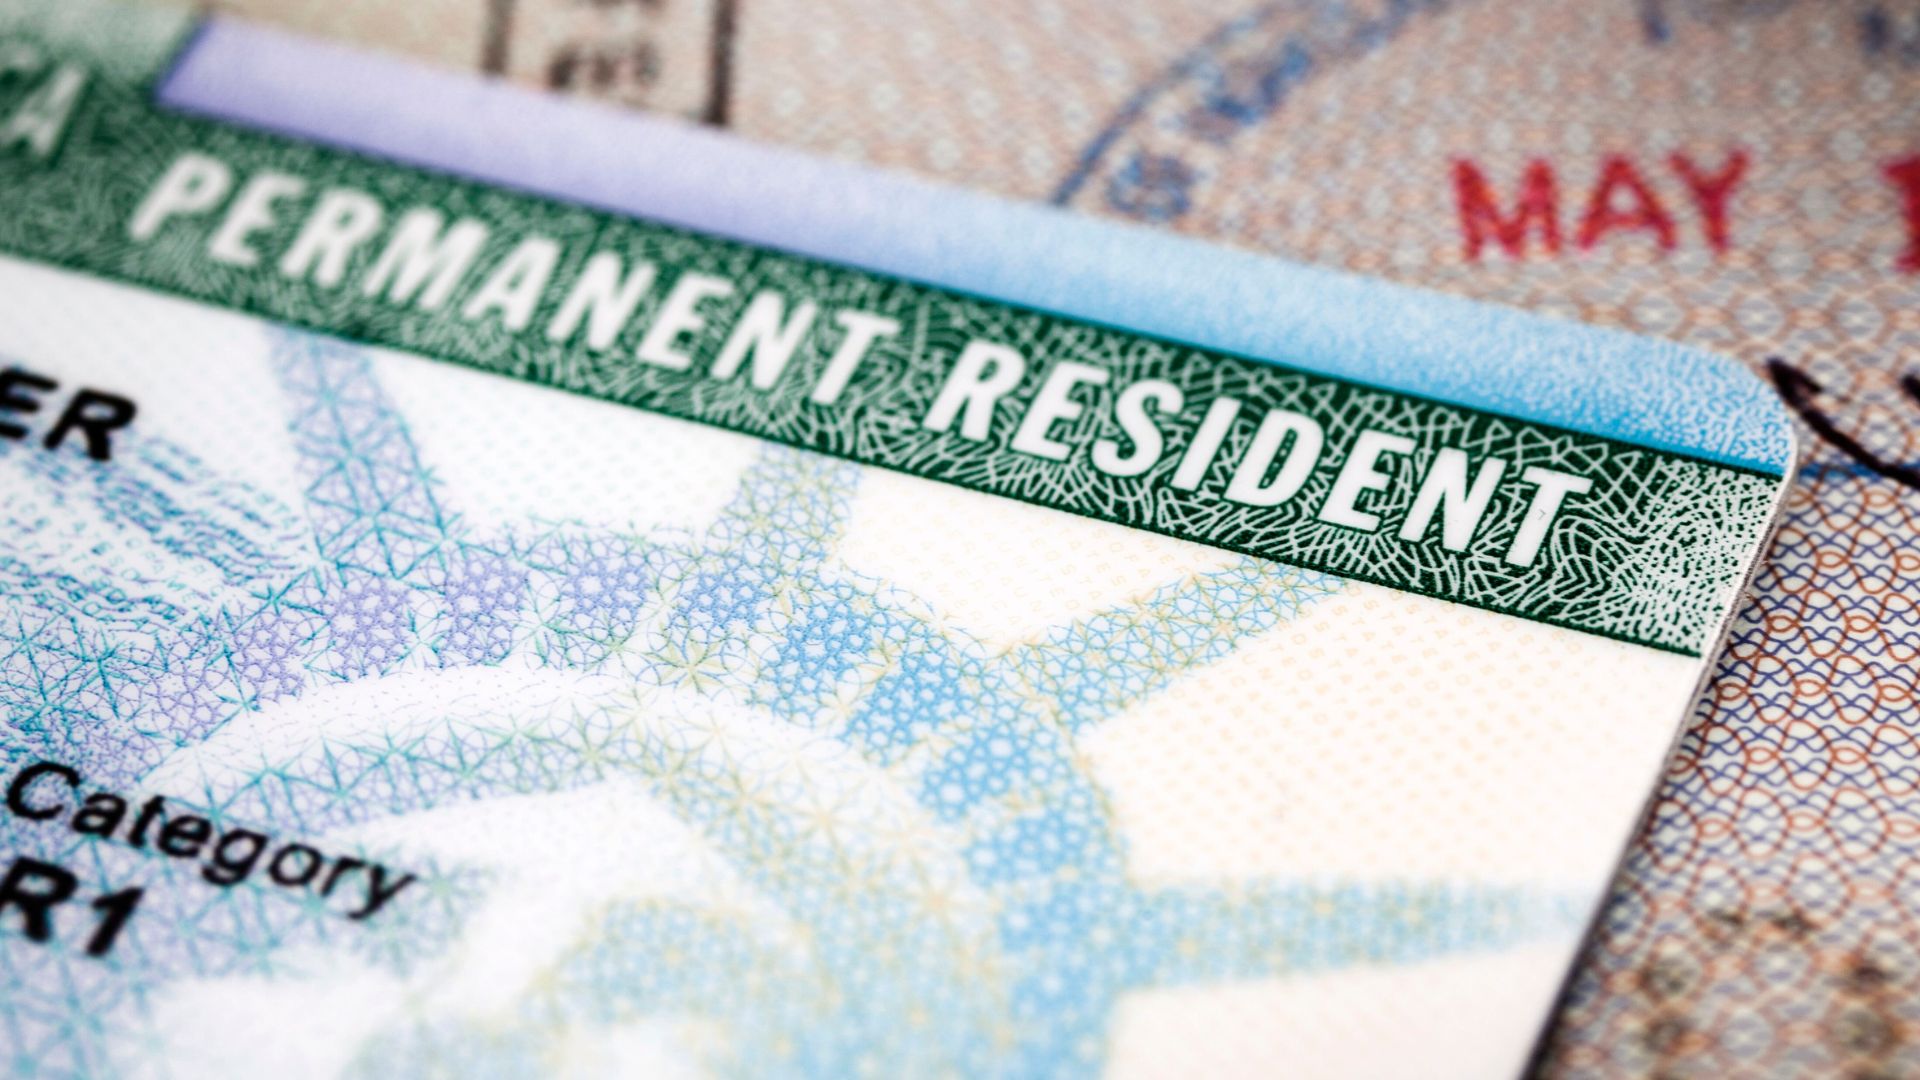 You Can Win A Green Card In The Diversity Visa Lottery.(Epoxidude/Getty Images)